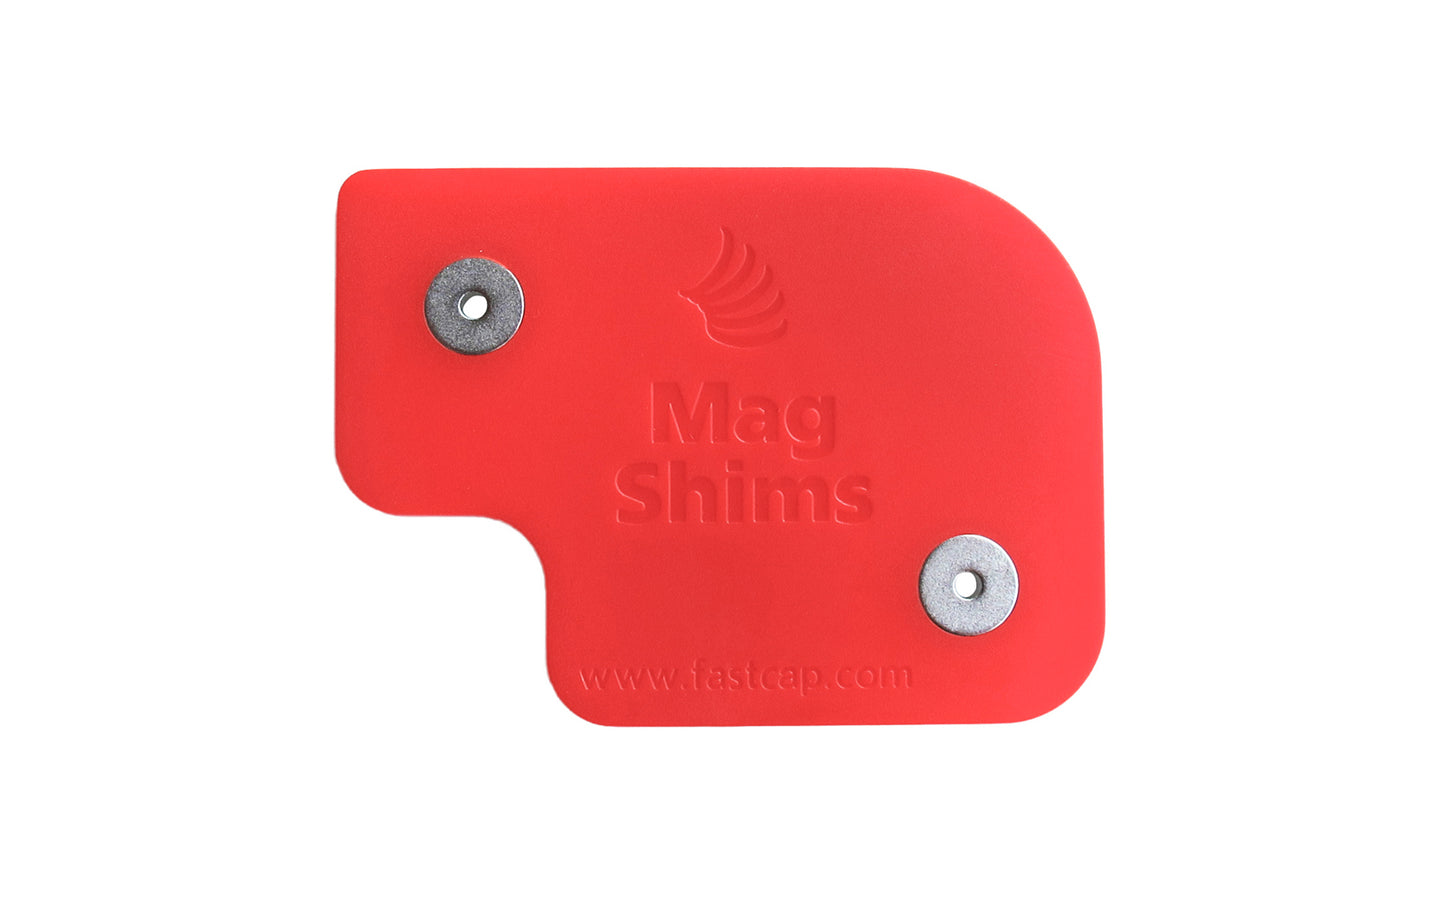 FastCap Mag Shim Standard ~ Magnetic shims for tool alignment - Standard - Great for table saws, band saws, drill presses, cabinet drawers & frames